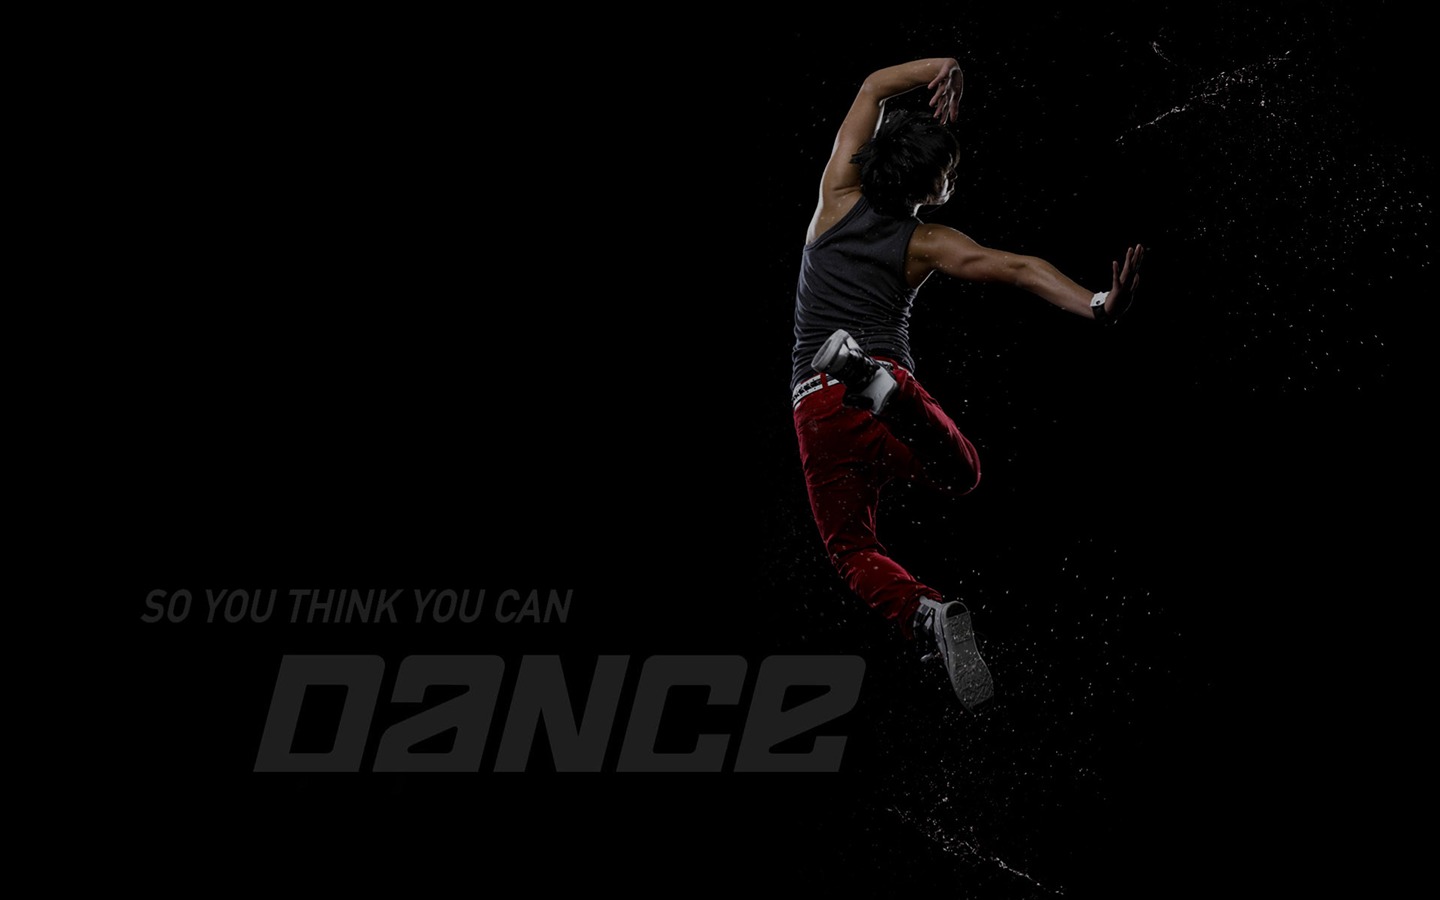 So You Think You Can Dance 舞林争霸 壁纸(二)12 - 1440x900